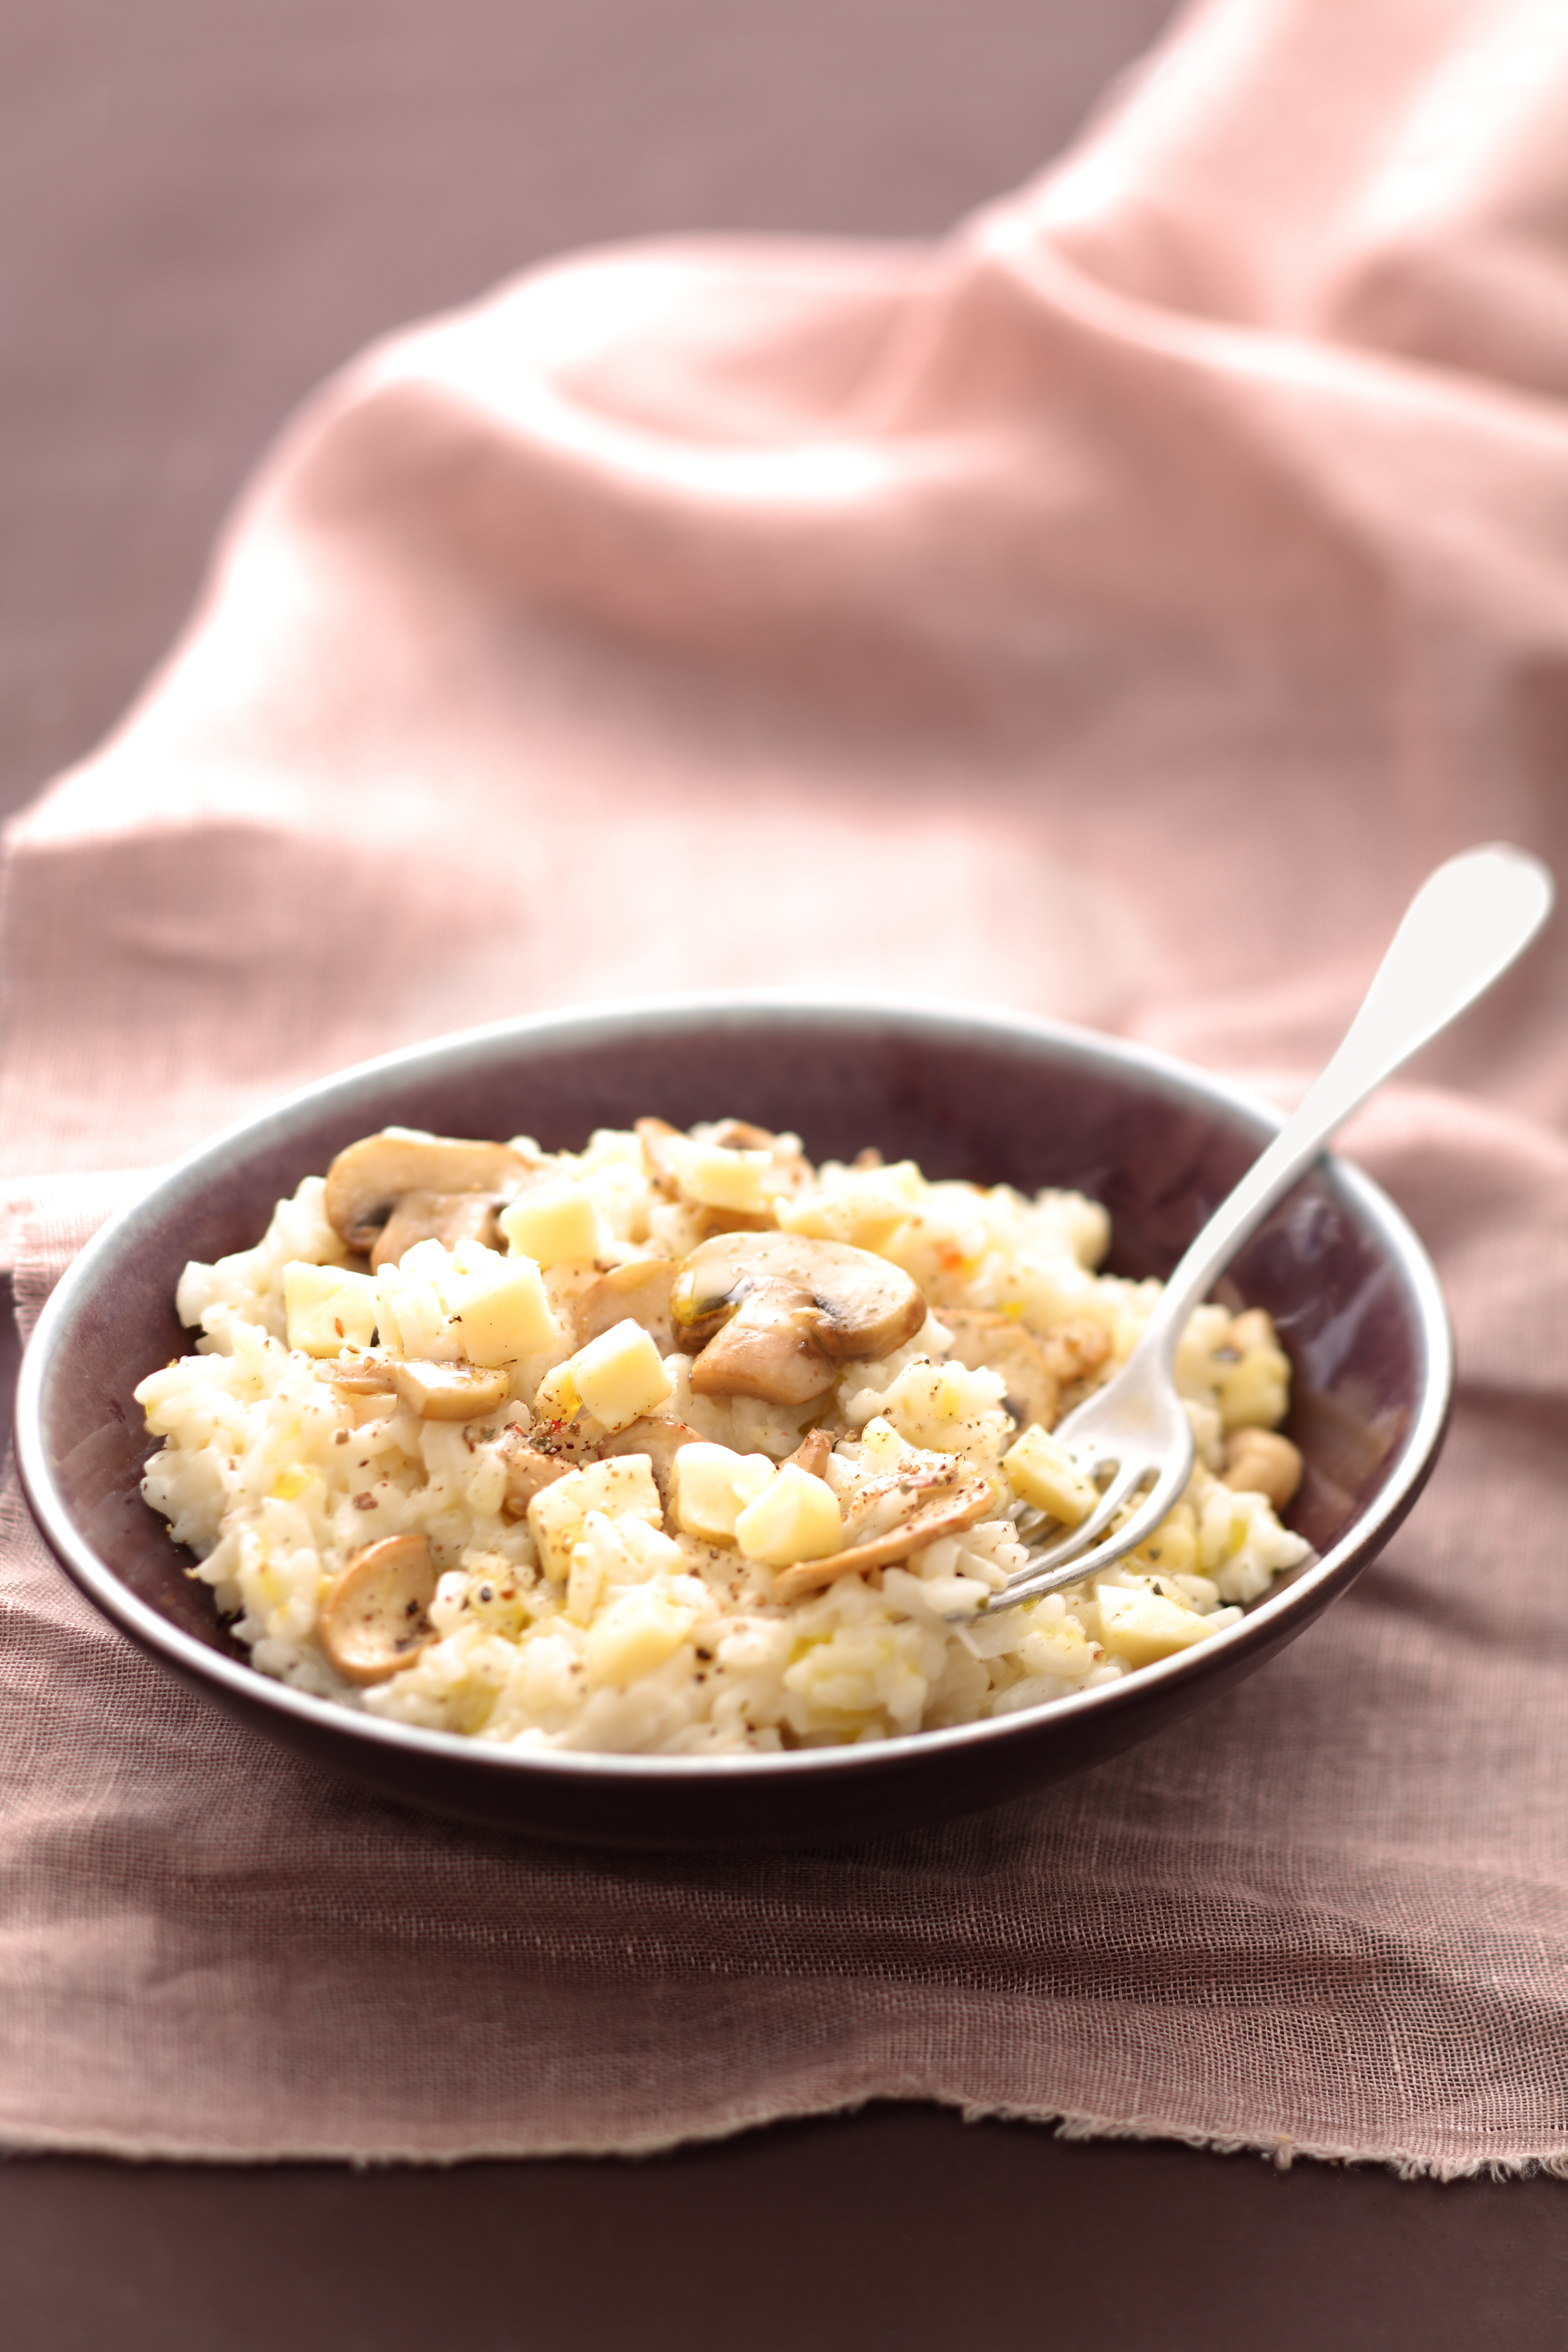 02-risotto-st-nectaire